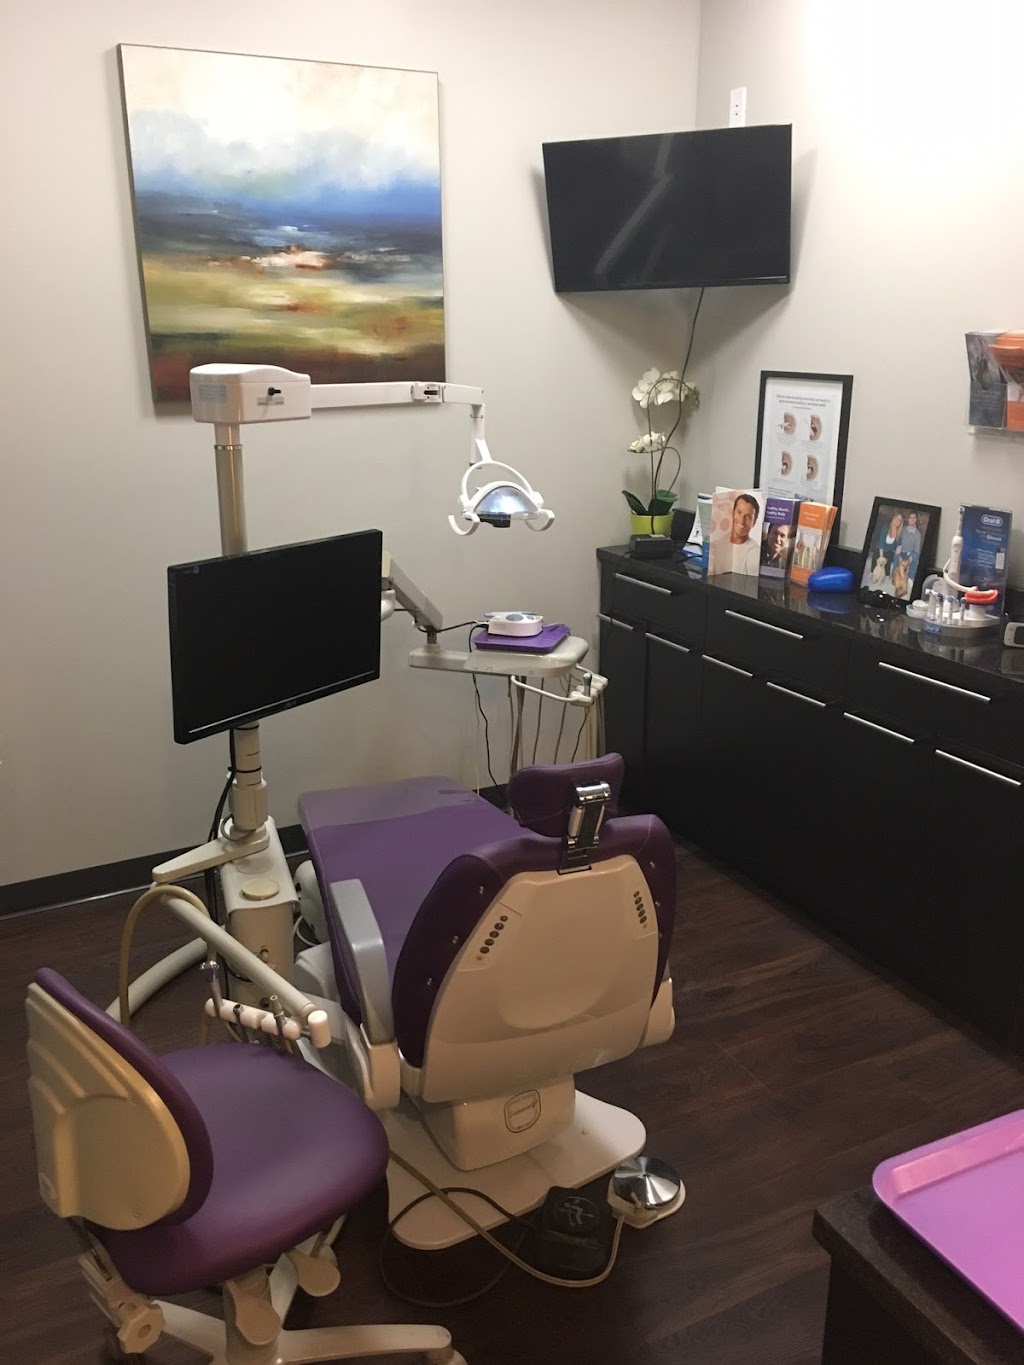 Midwest Dental Apple Valley | 15594 Pilot Knob Rd #100, Apple Valley, MN 55124, USA | Phone: (952) 388-6900